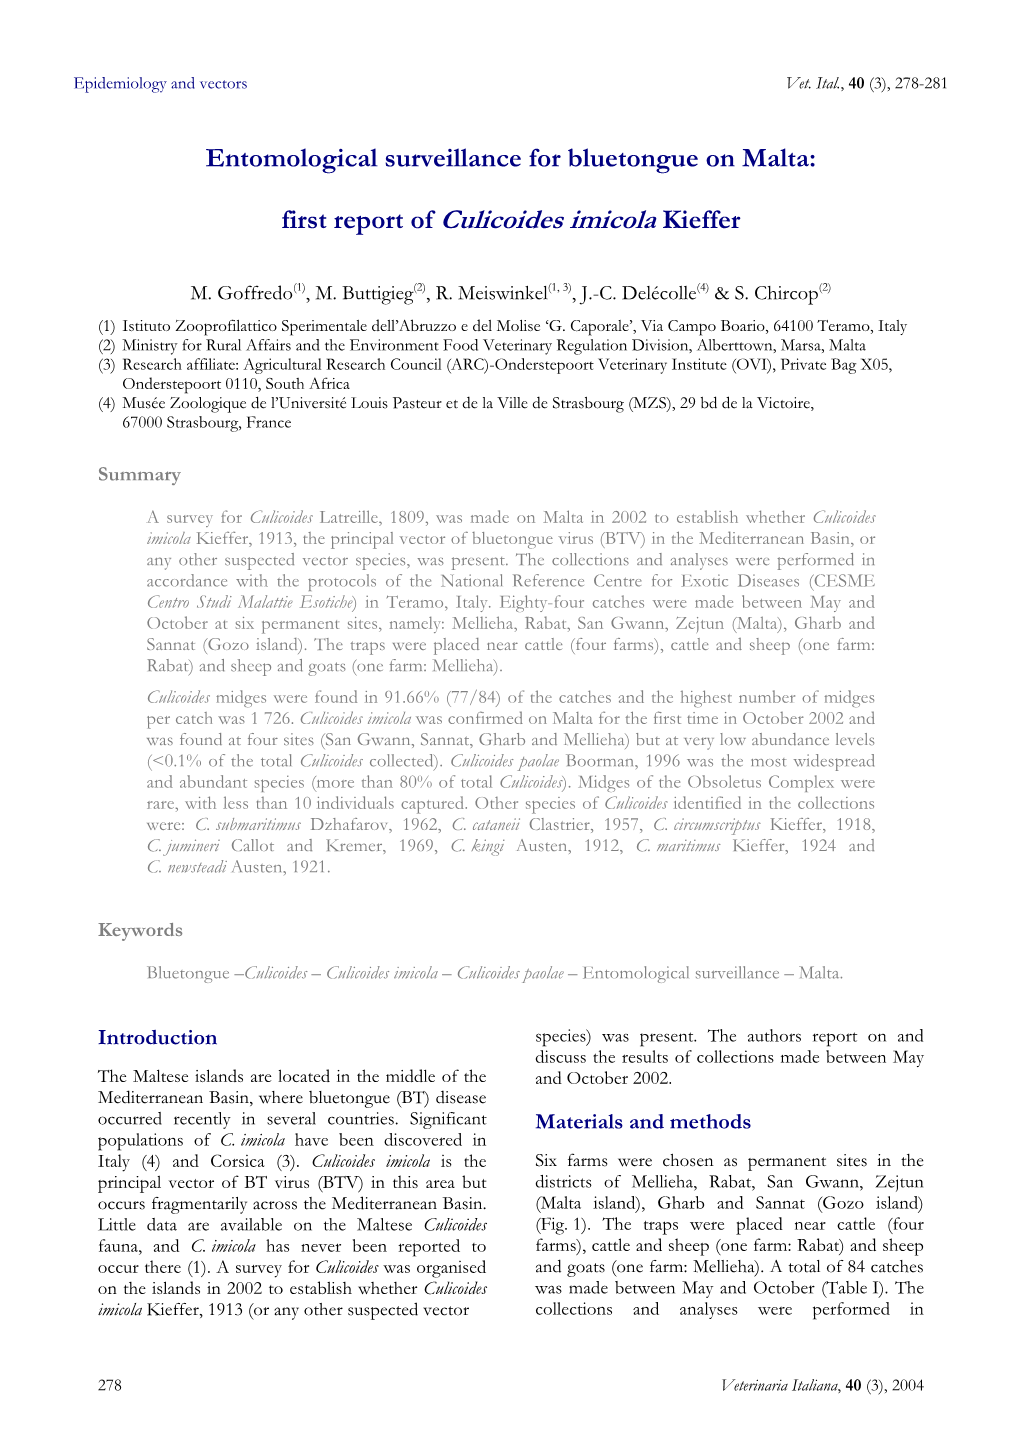 Entomological Surveillance for Bluetongue on Malta: First Report of Culicoides Imicola Kieffer